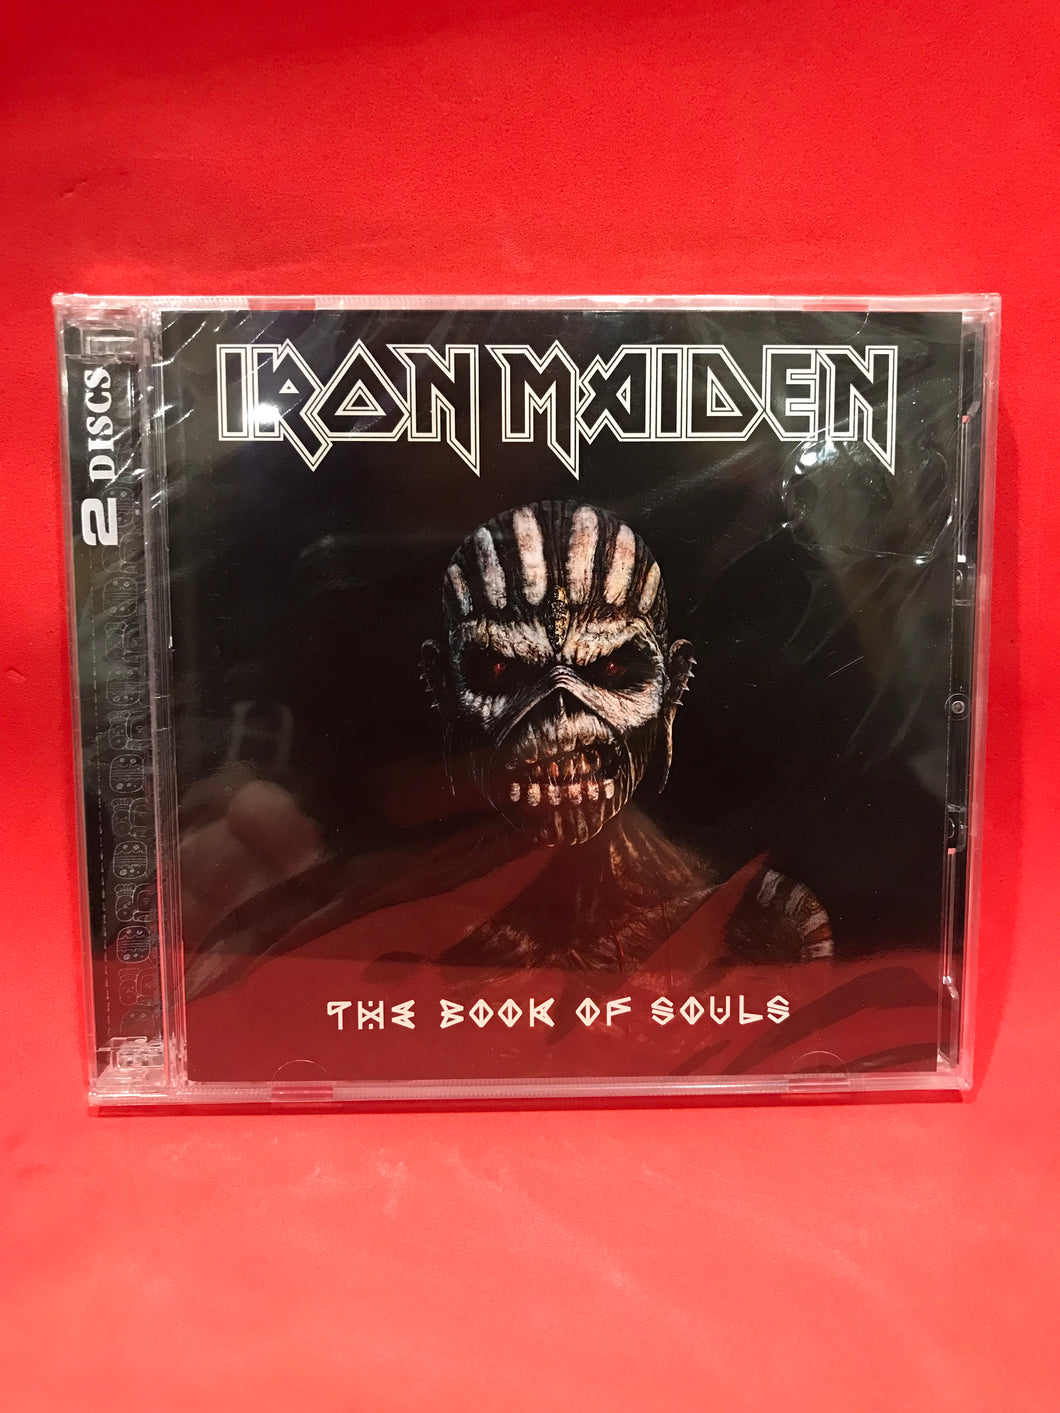 IRON MAIDEN - THE BOOK OF SOULS - 2 CD DISCS (SEALED)